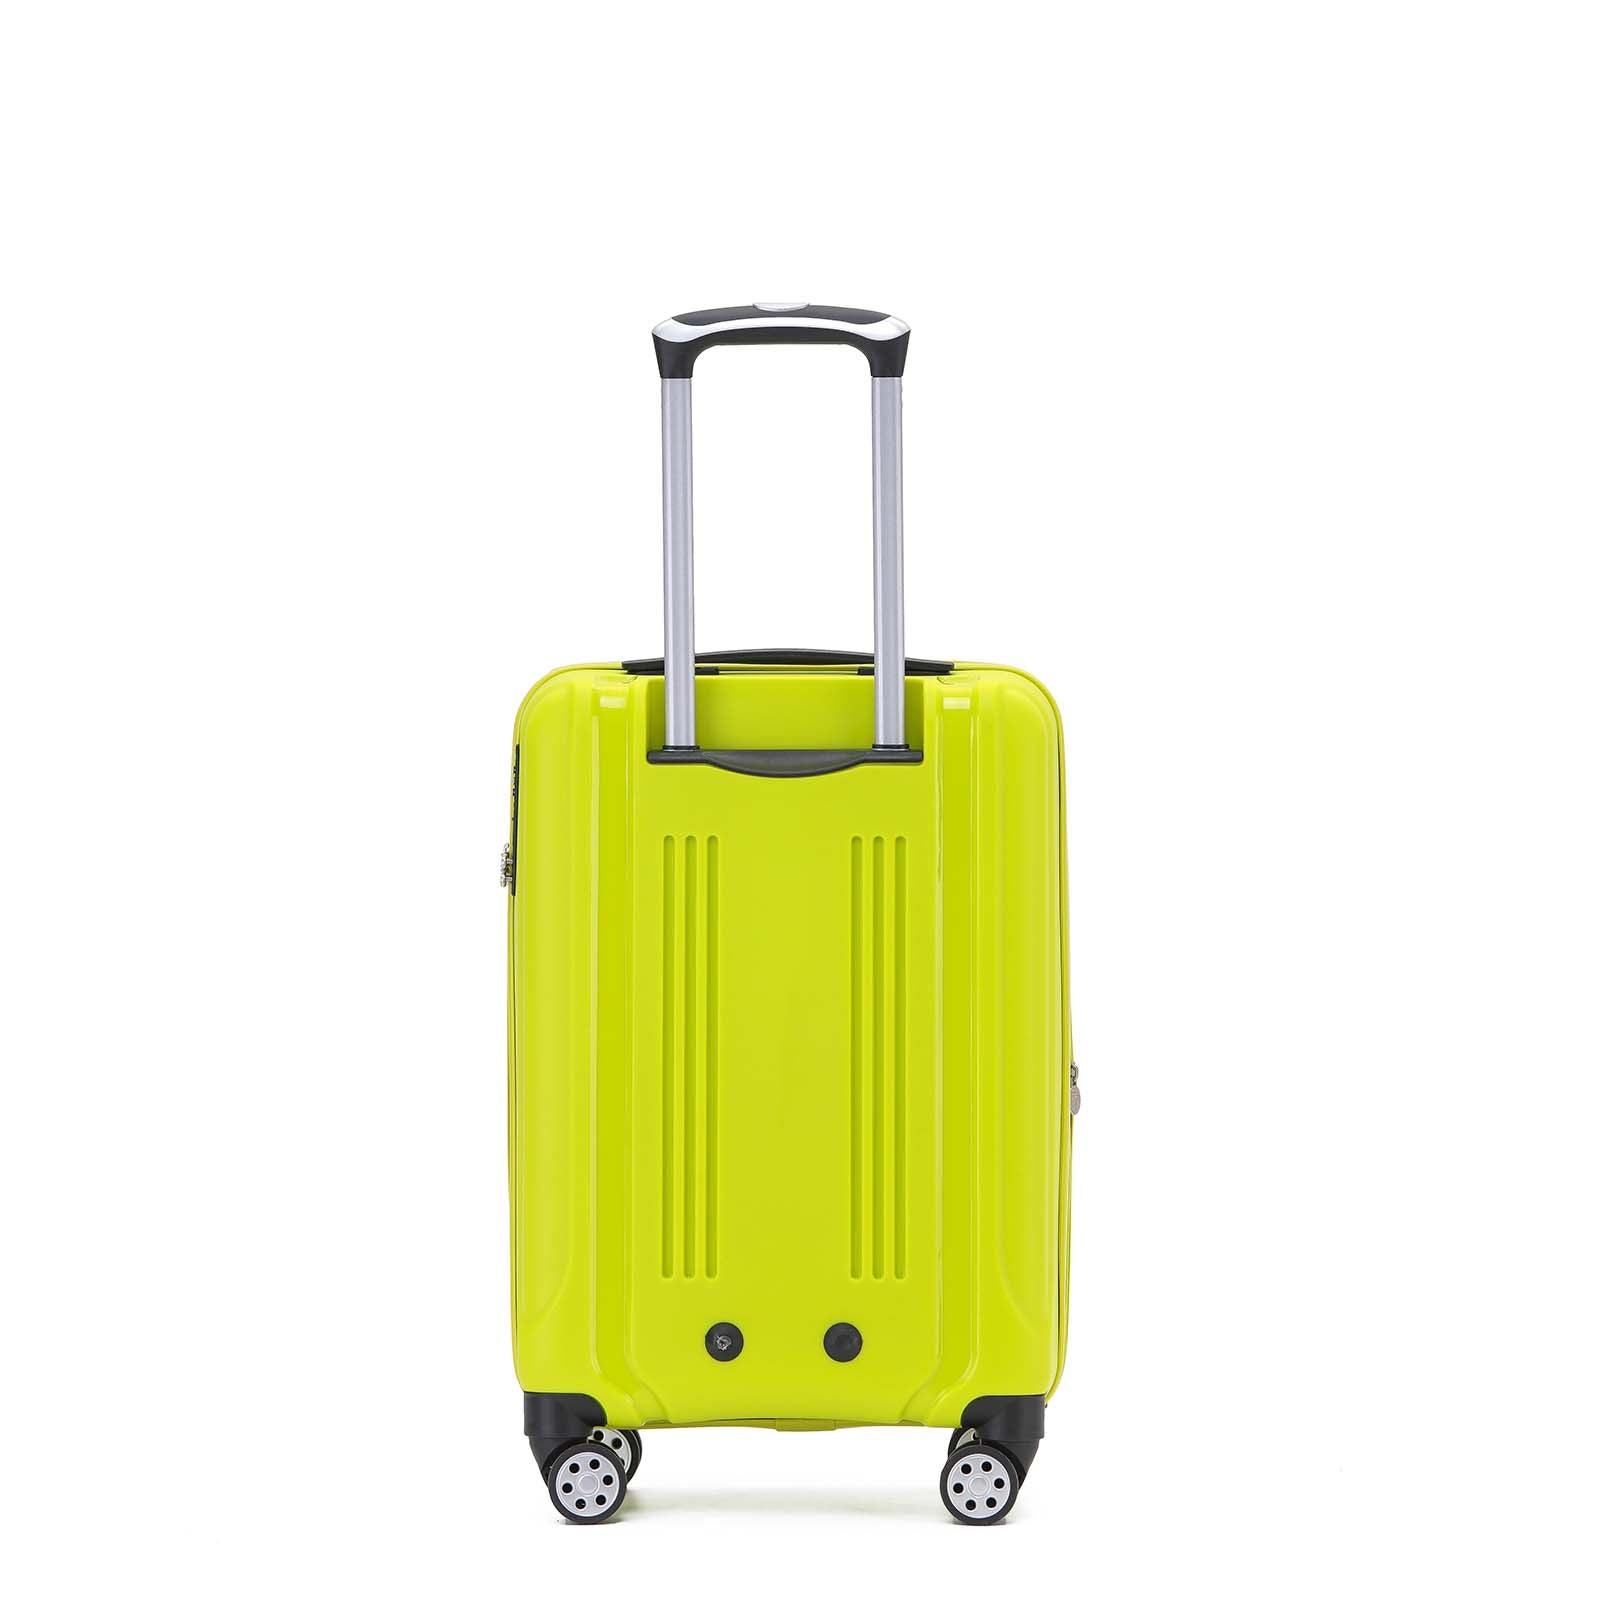 Tosca Warrior 4 Wheel 55cm Carry-On Suitcase Lime